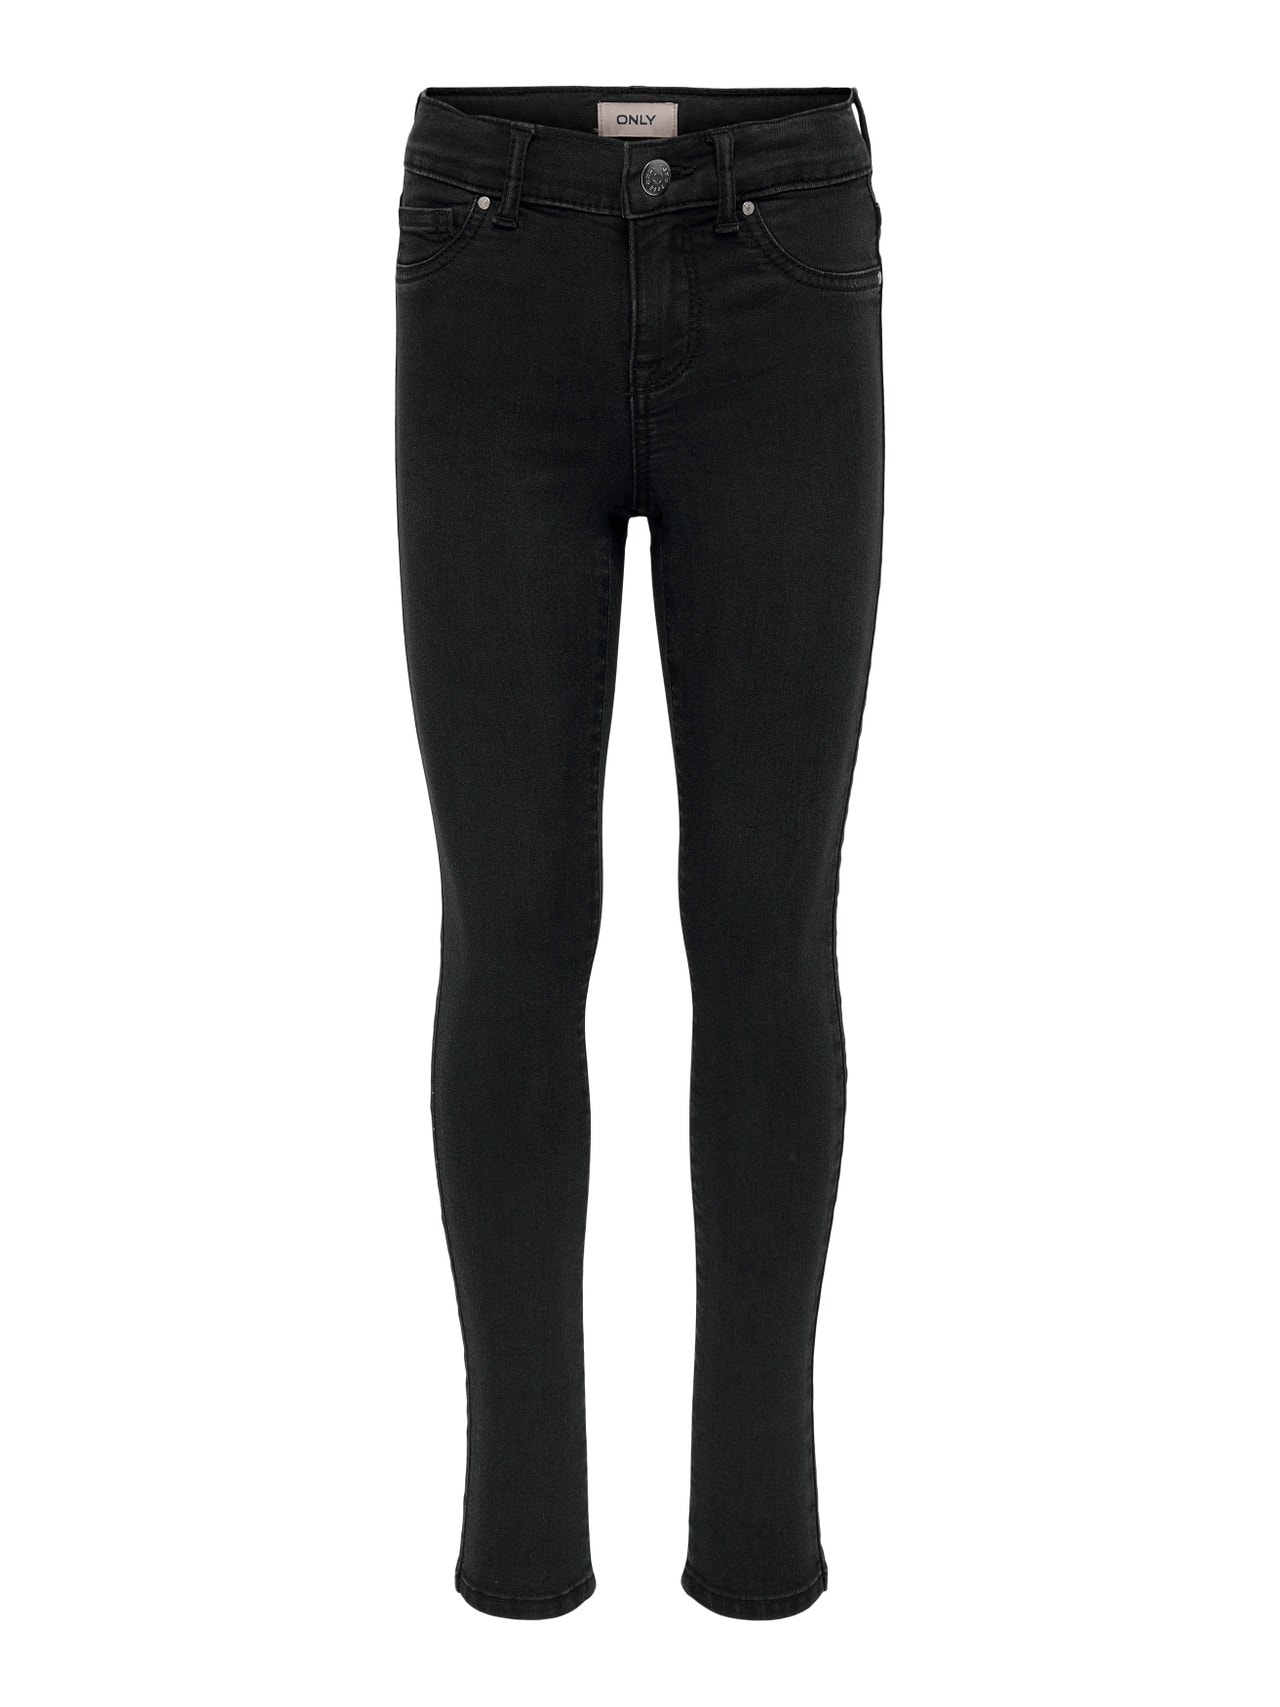 ONLY Jeans Skinny Fit -Black - 15274246